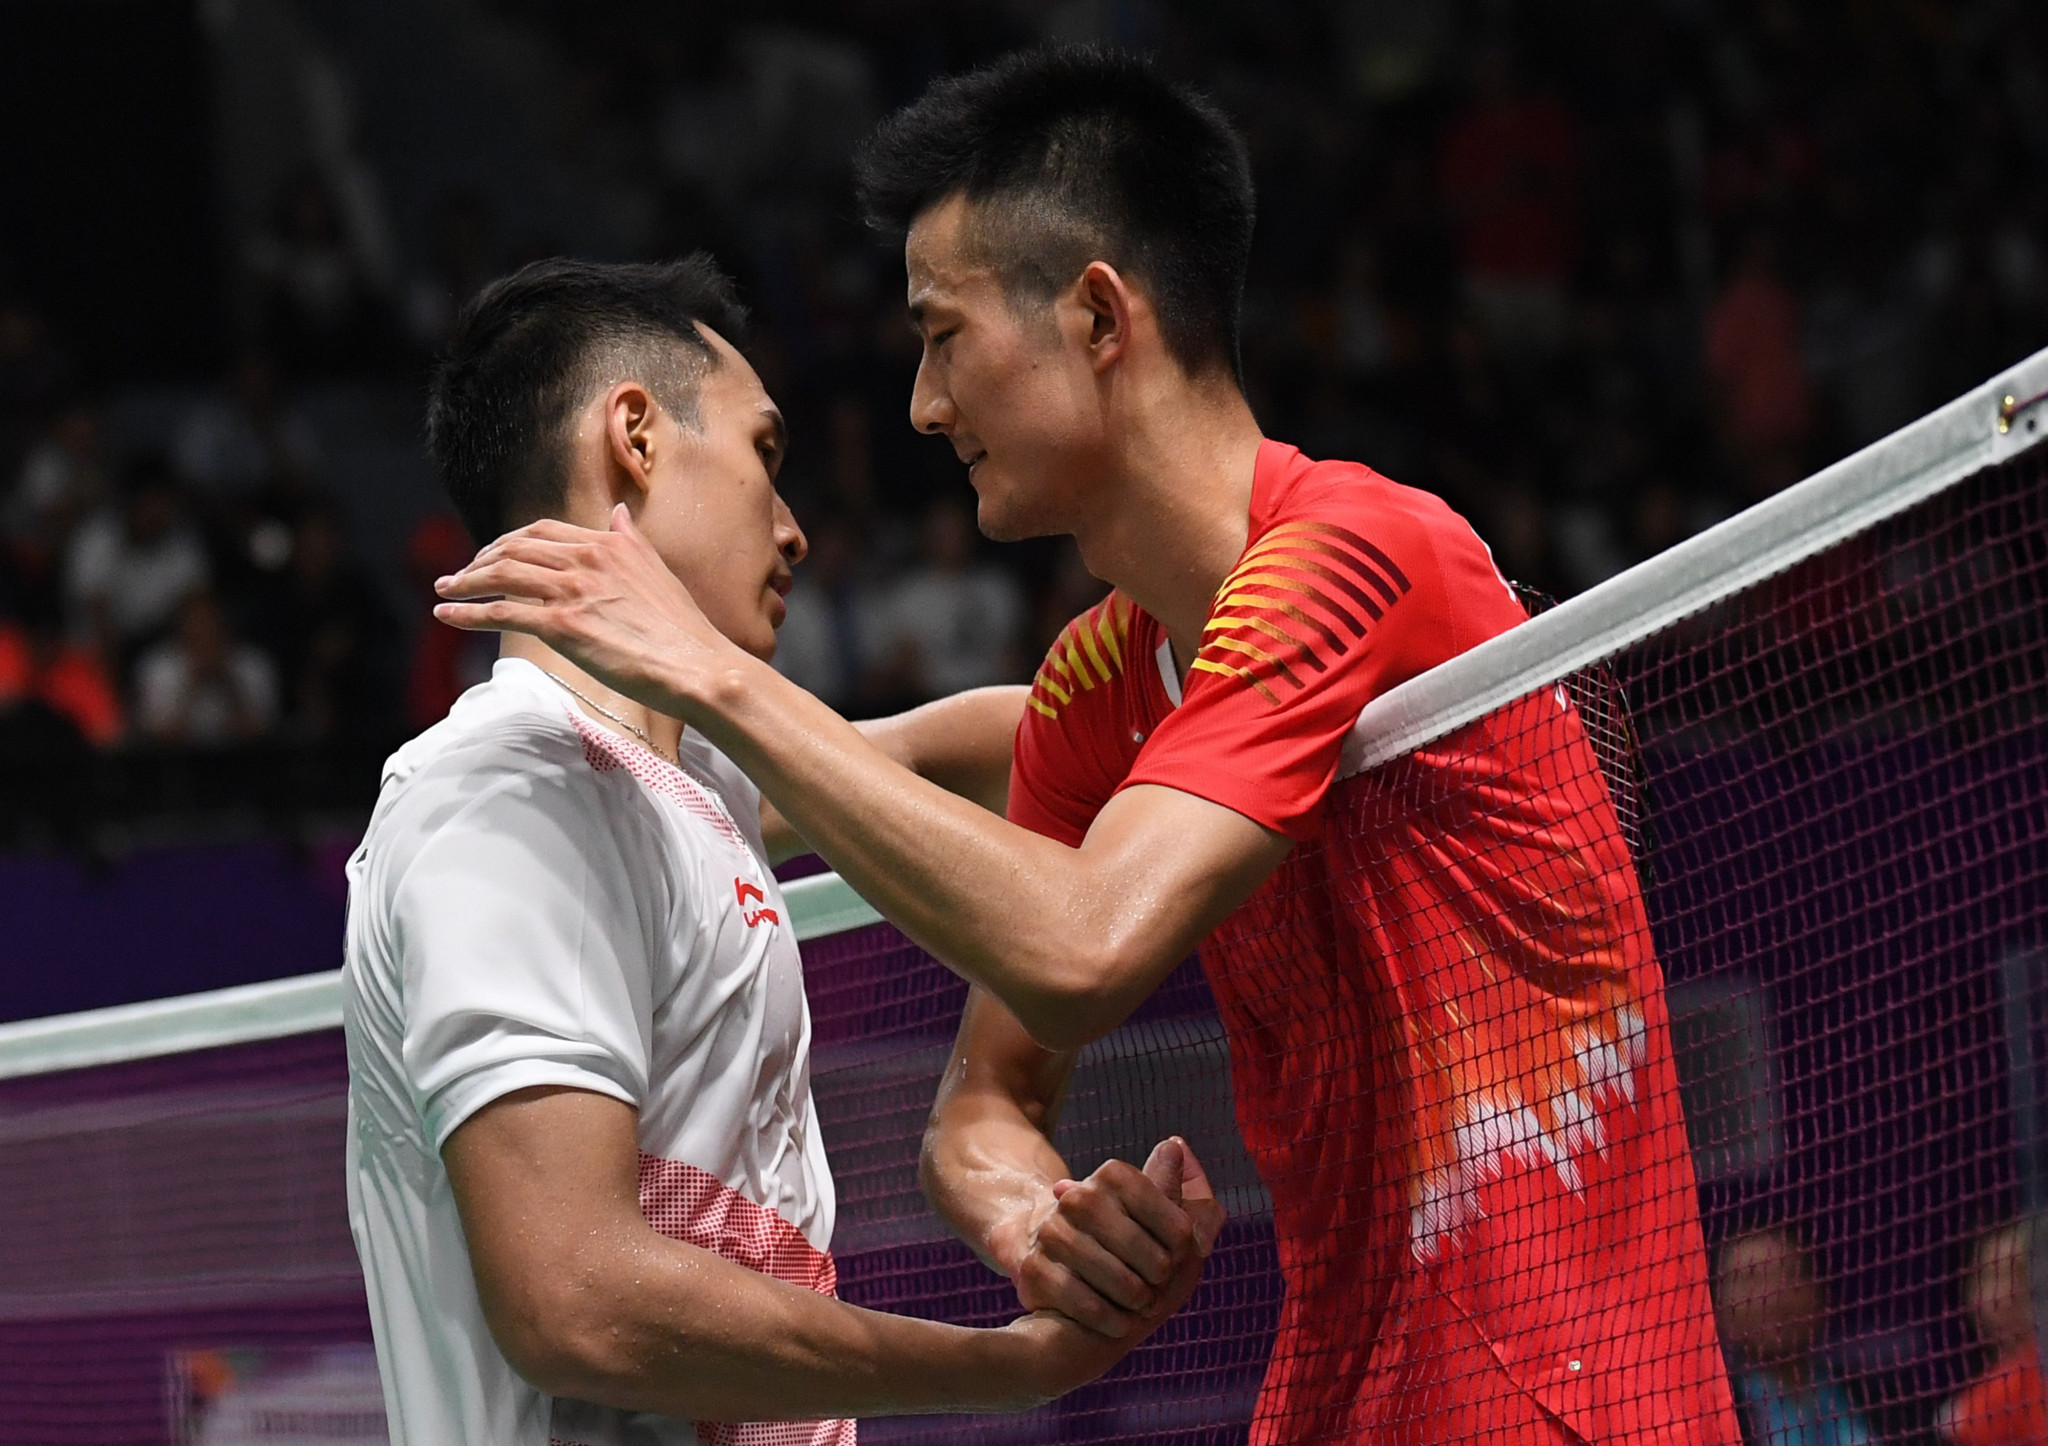 Epic men's team badminton final caps off action-packed fourth day at 2018 Asian Games